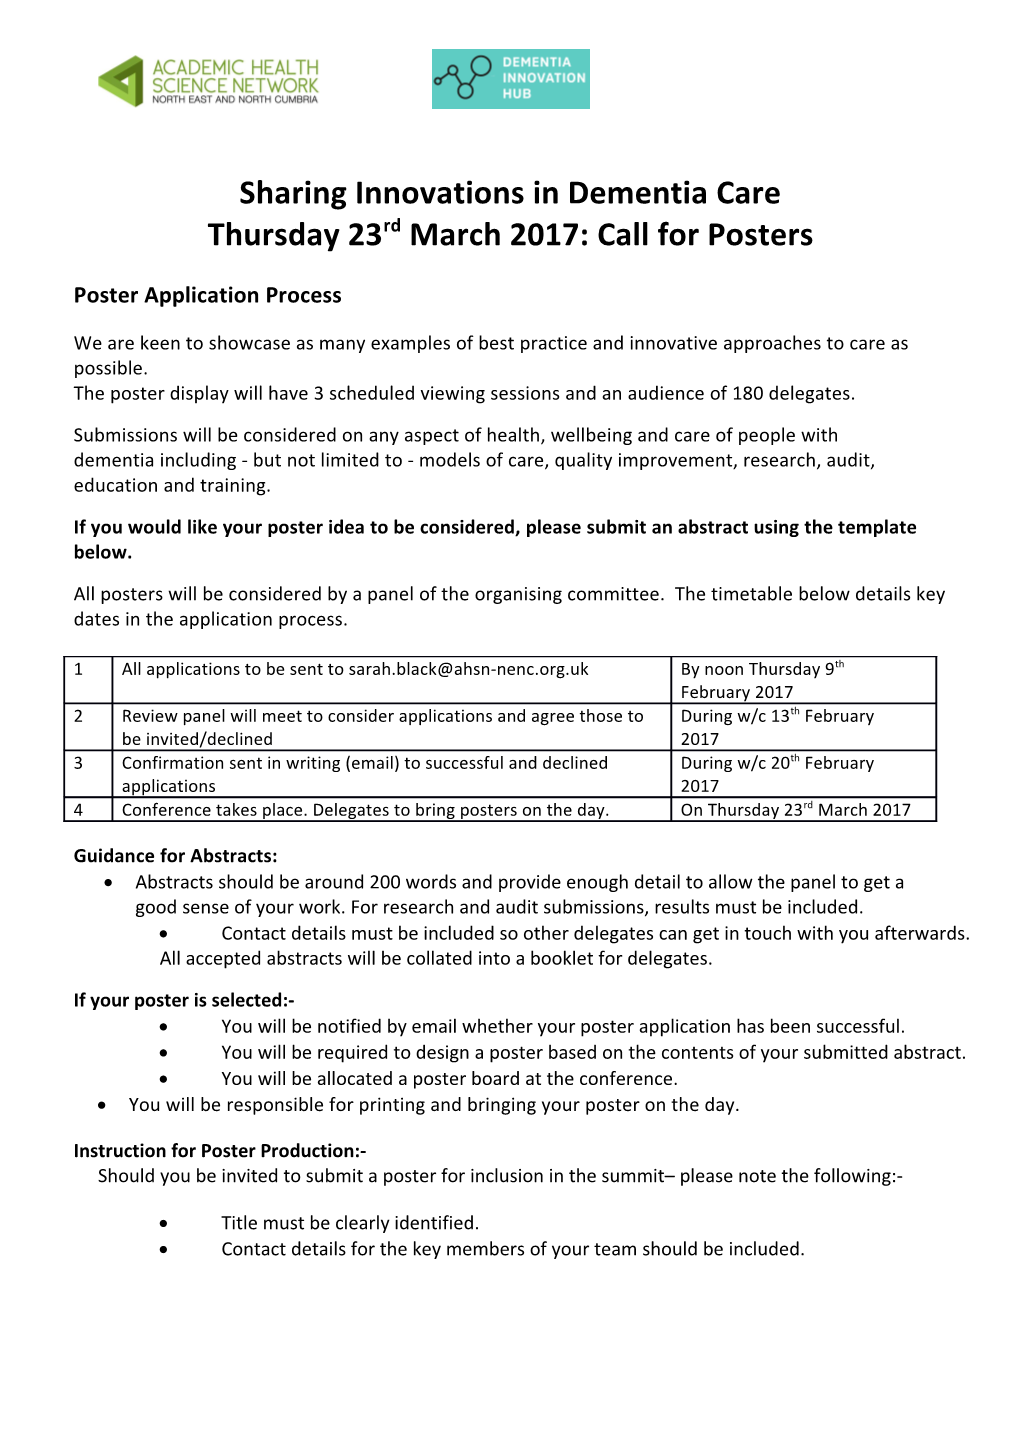 Poster Application Process